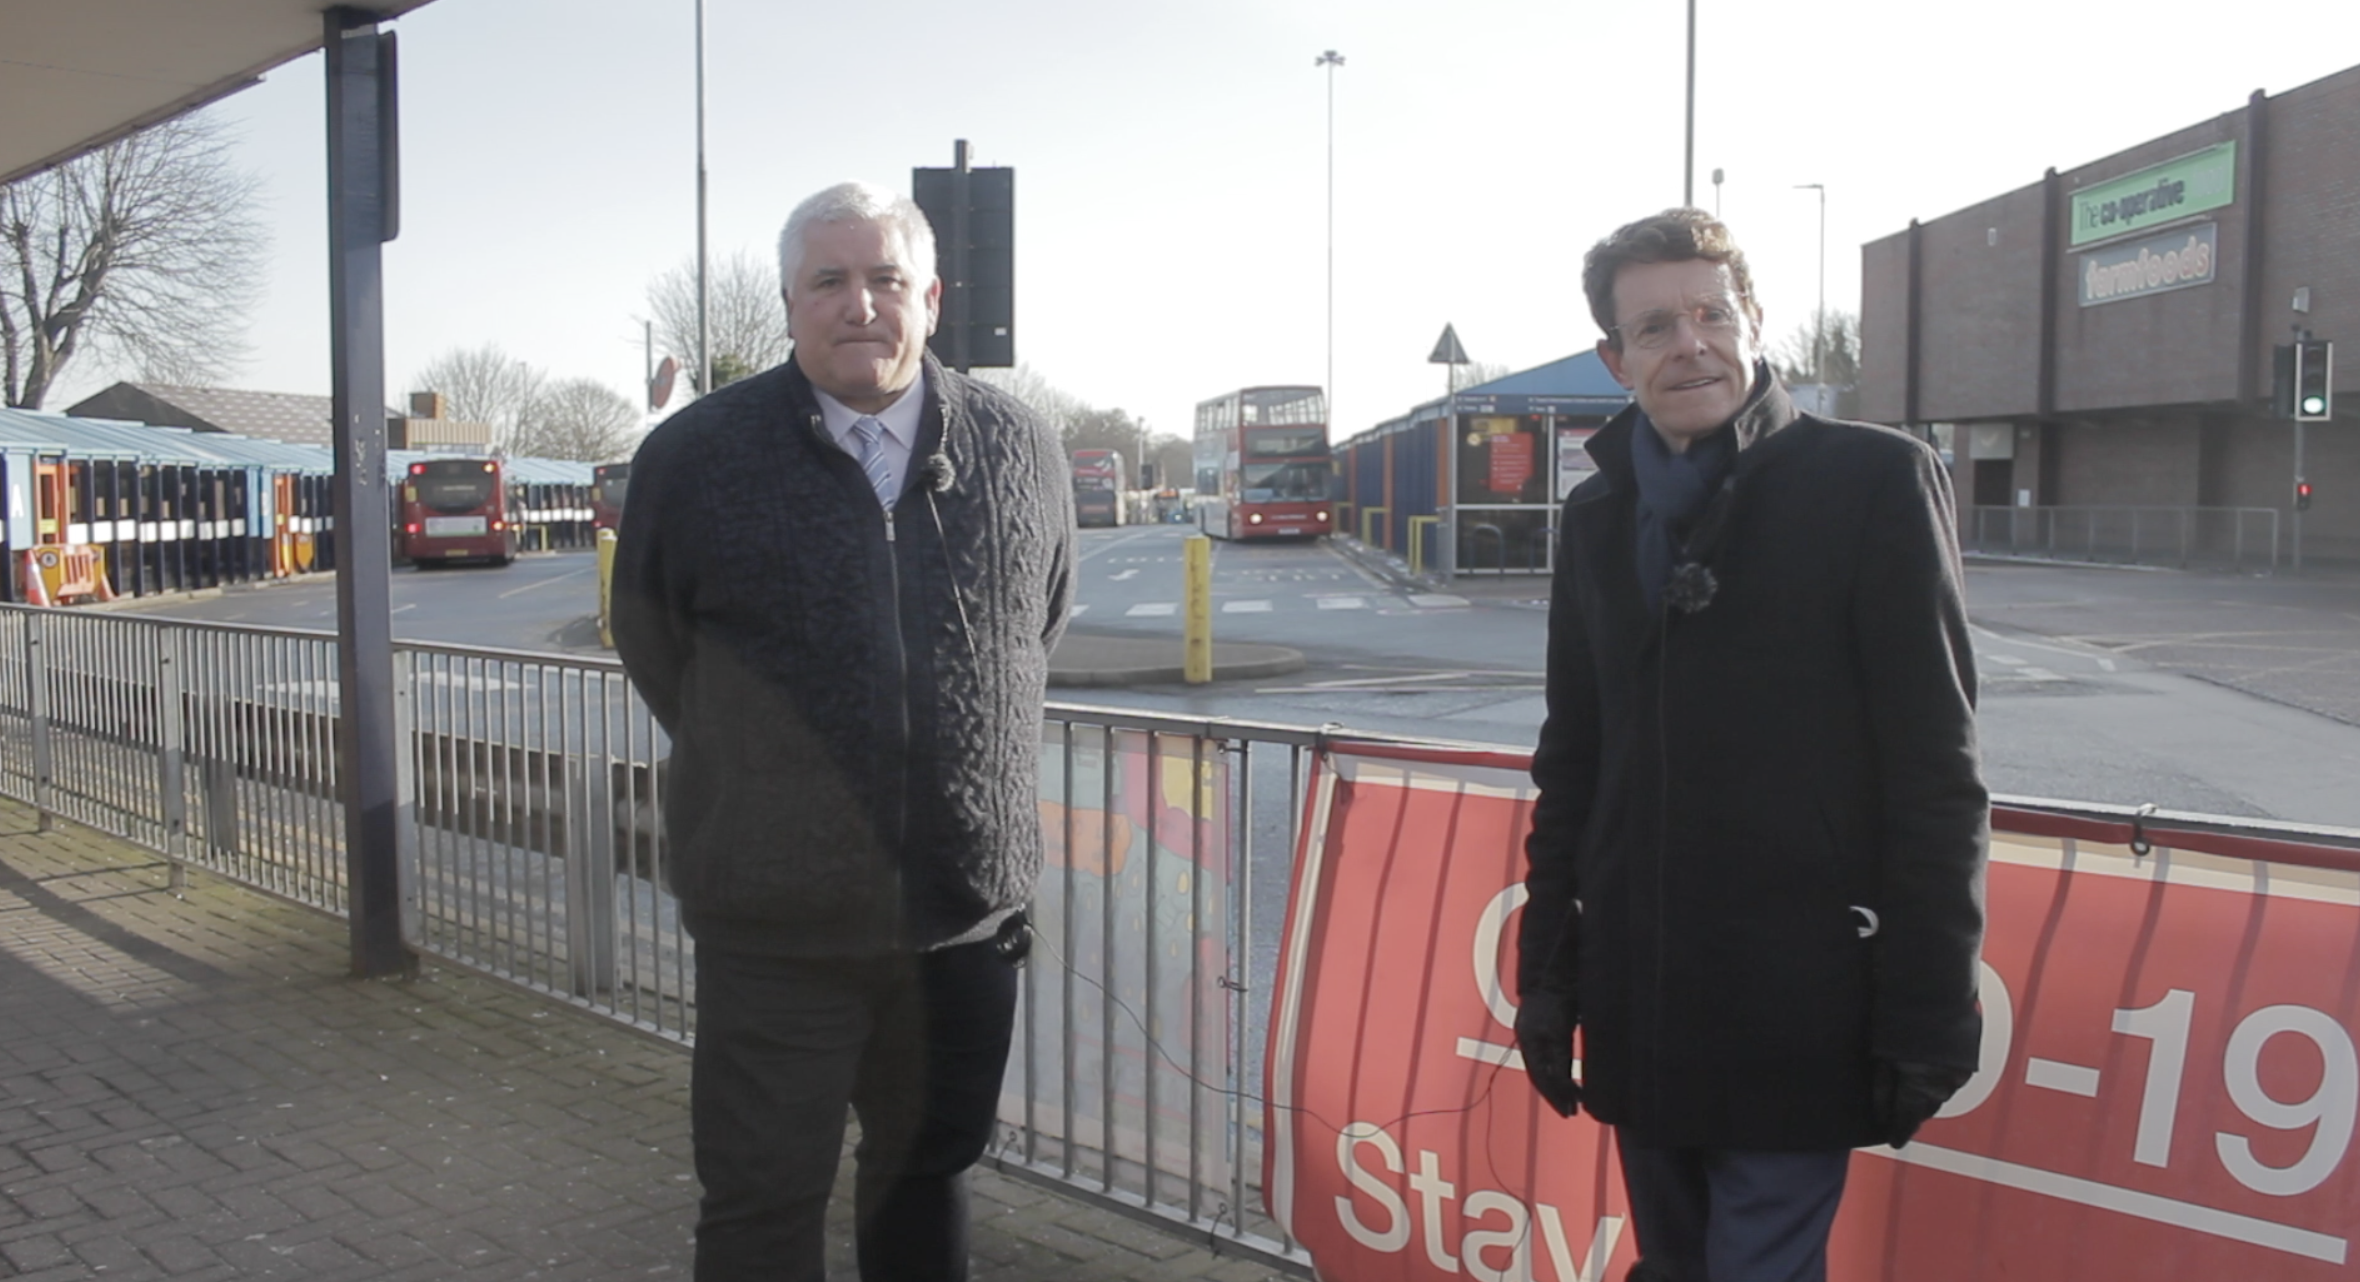 Brierley Hill High Street is to get a £10 million cash injection.